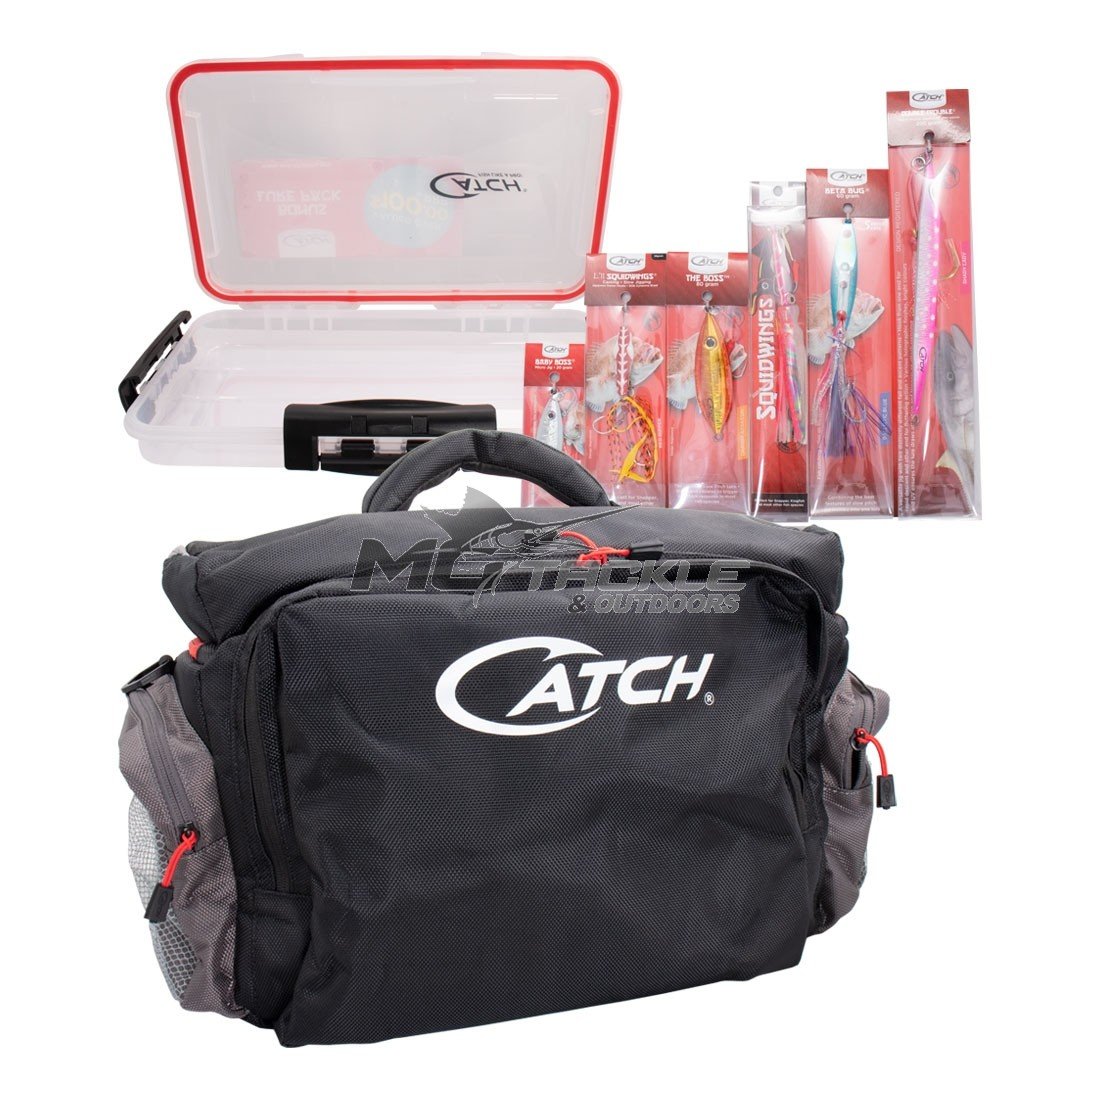 Catch Pro Tackle Bag With Bonus Lure Pack